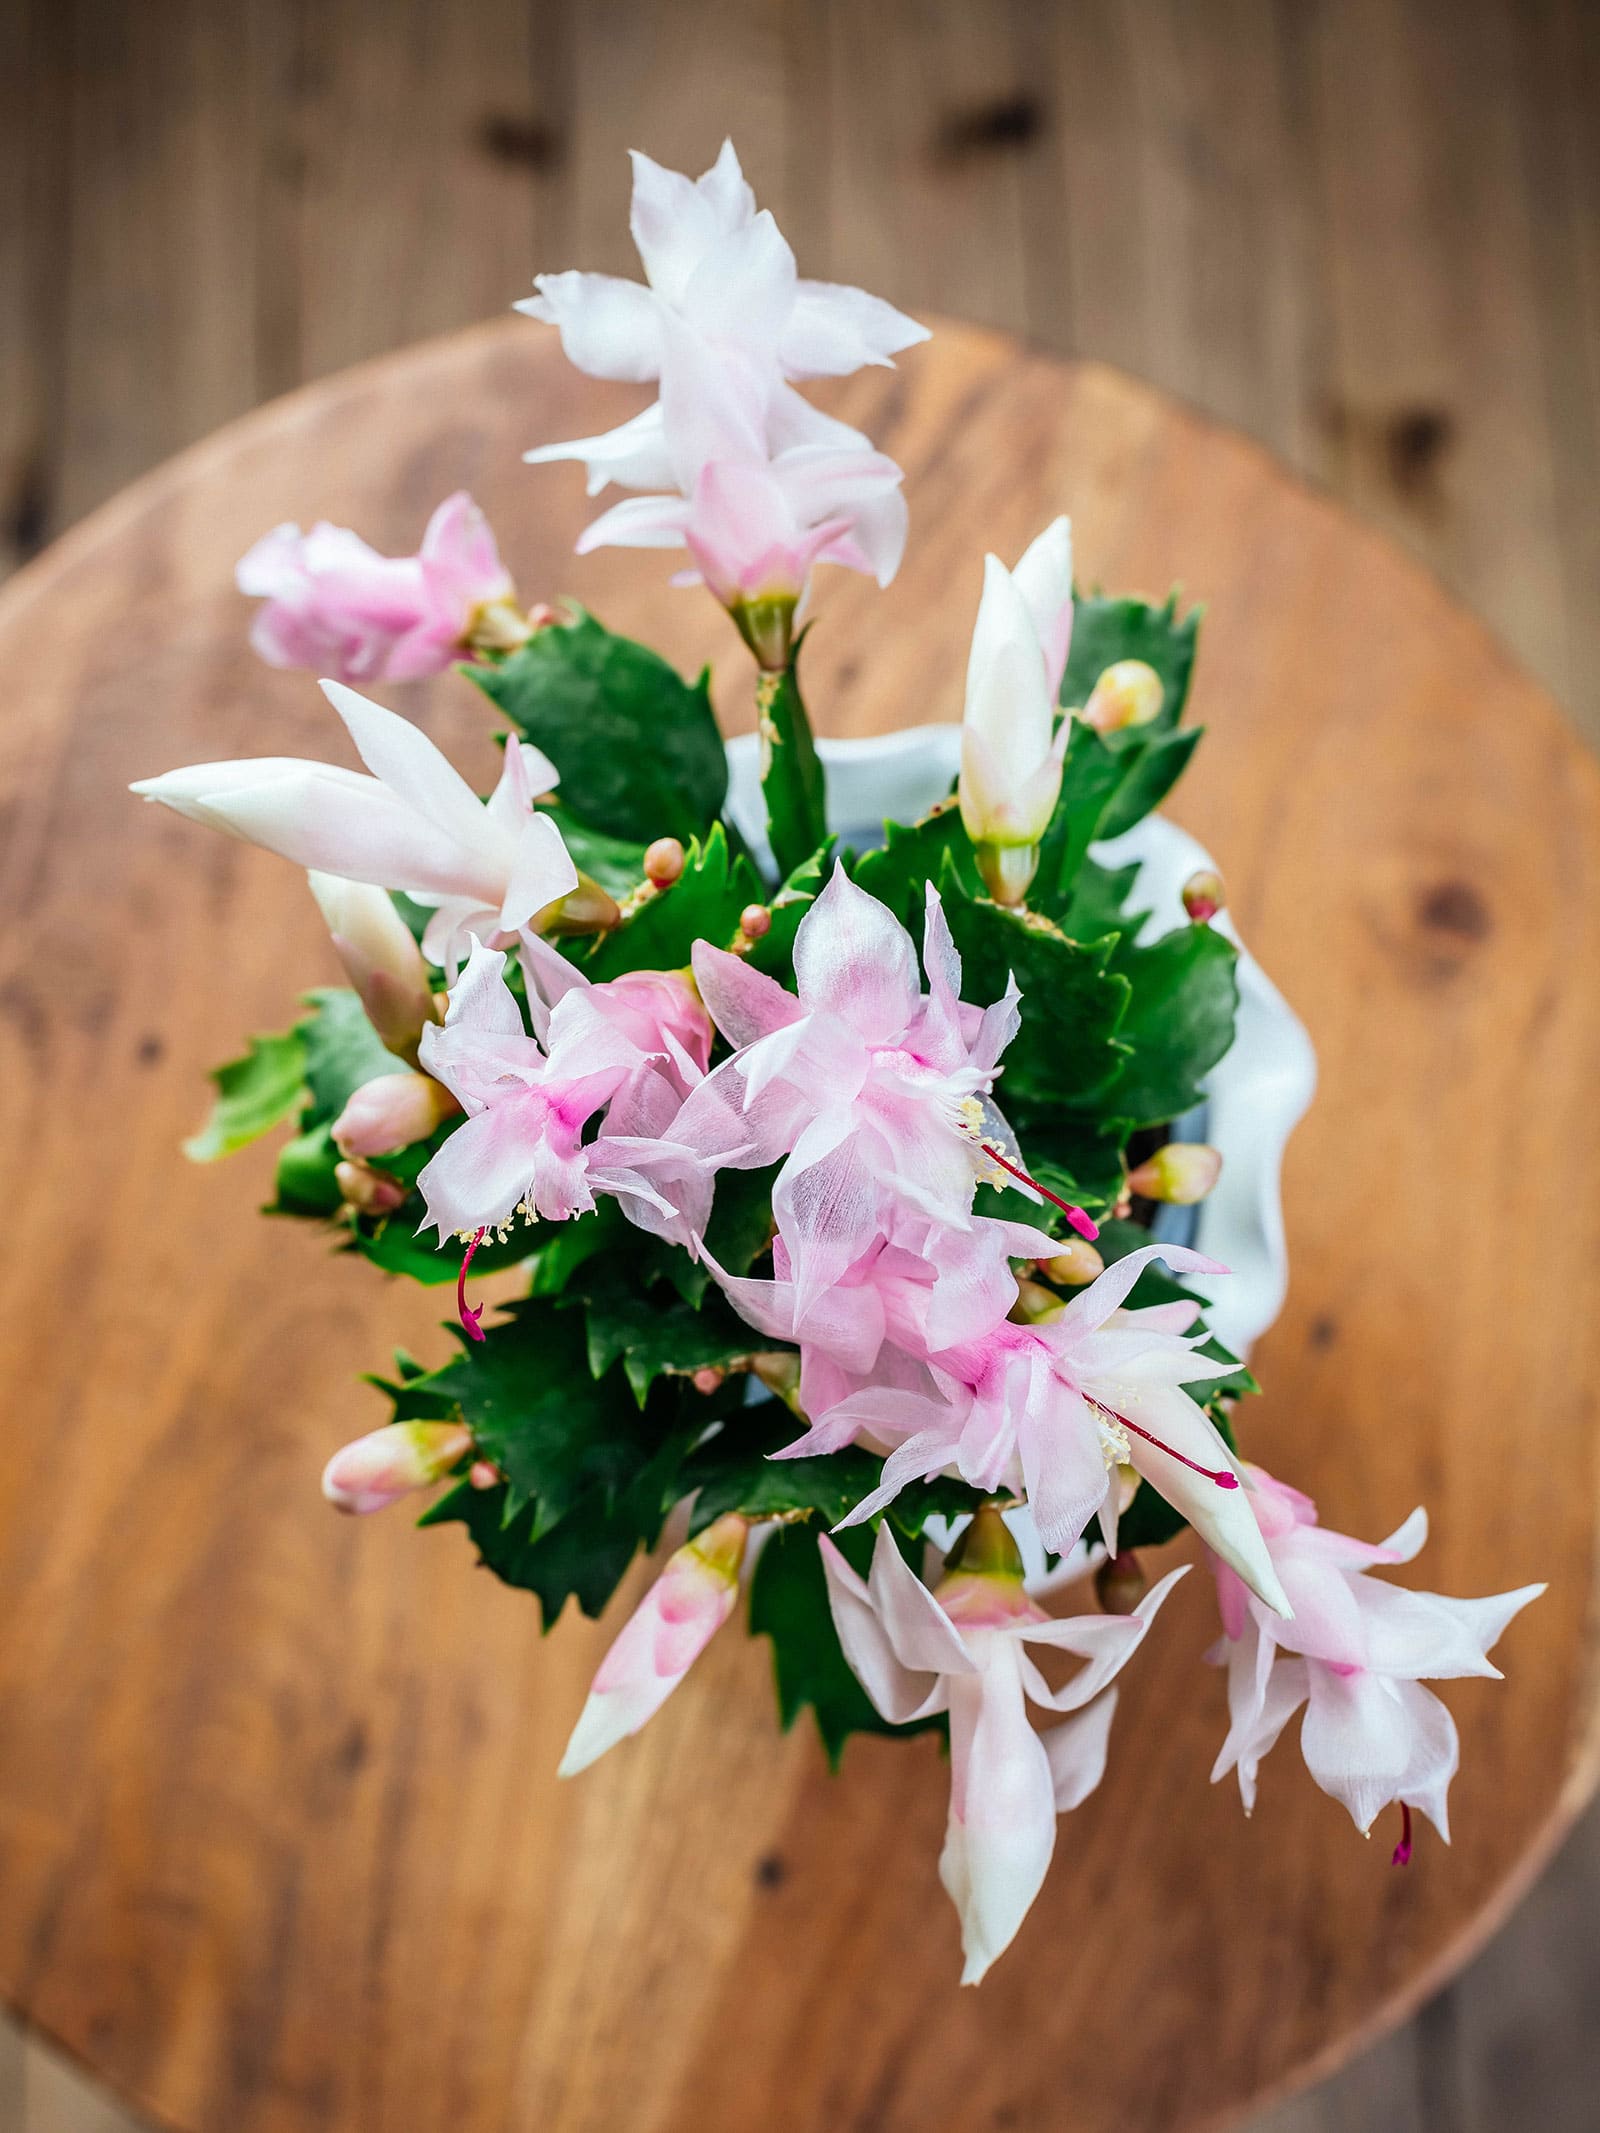 Overhead view of Christmas cactus houseplant on a round wooden table, covered in pink blooms